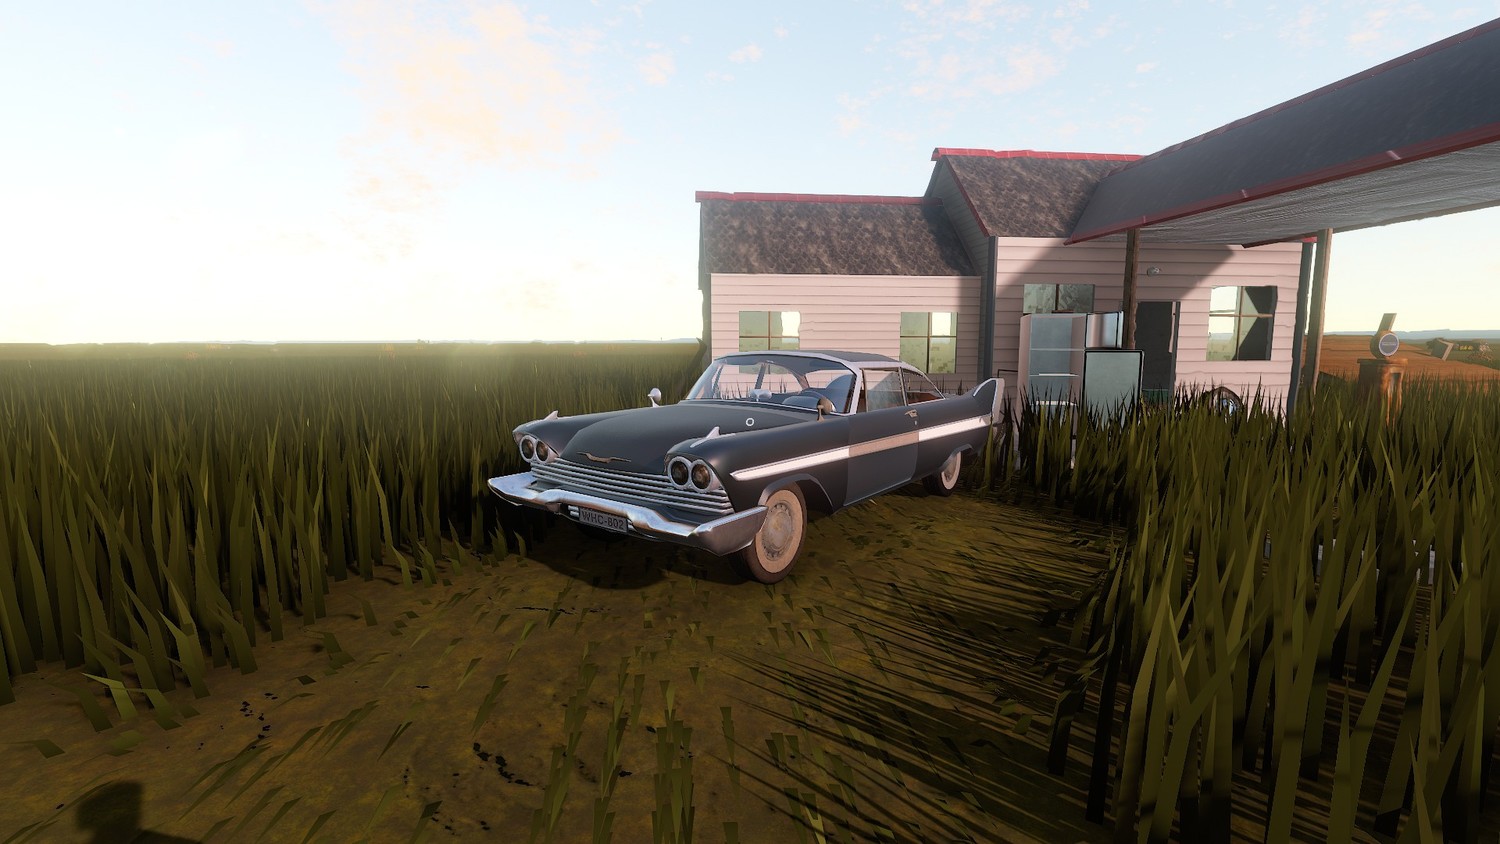 The Long Drive: SaveGame (black Plymouth Fury in good condition)